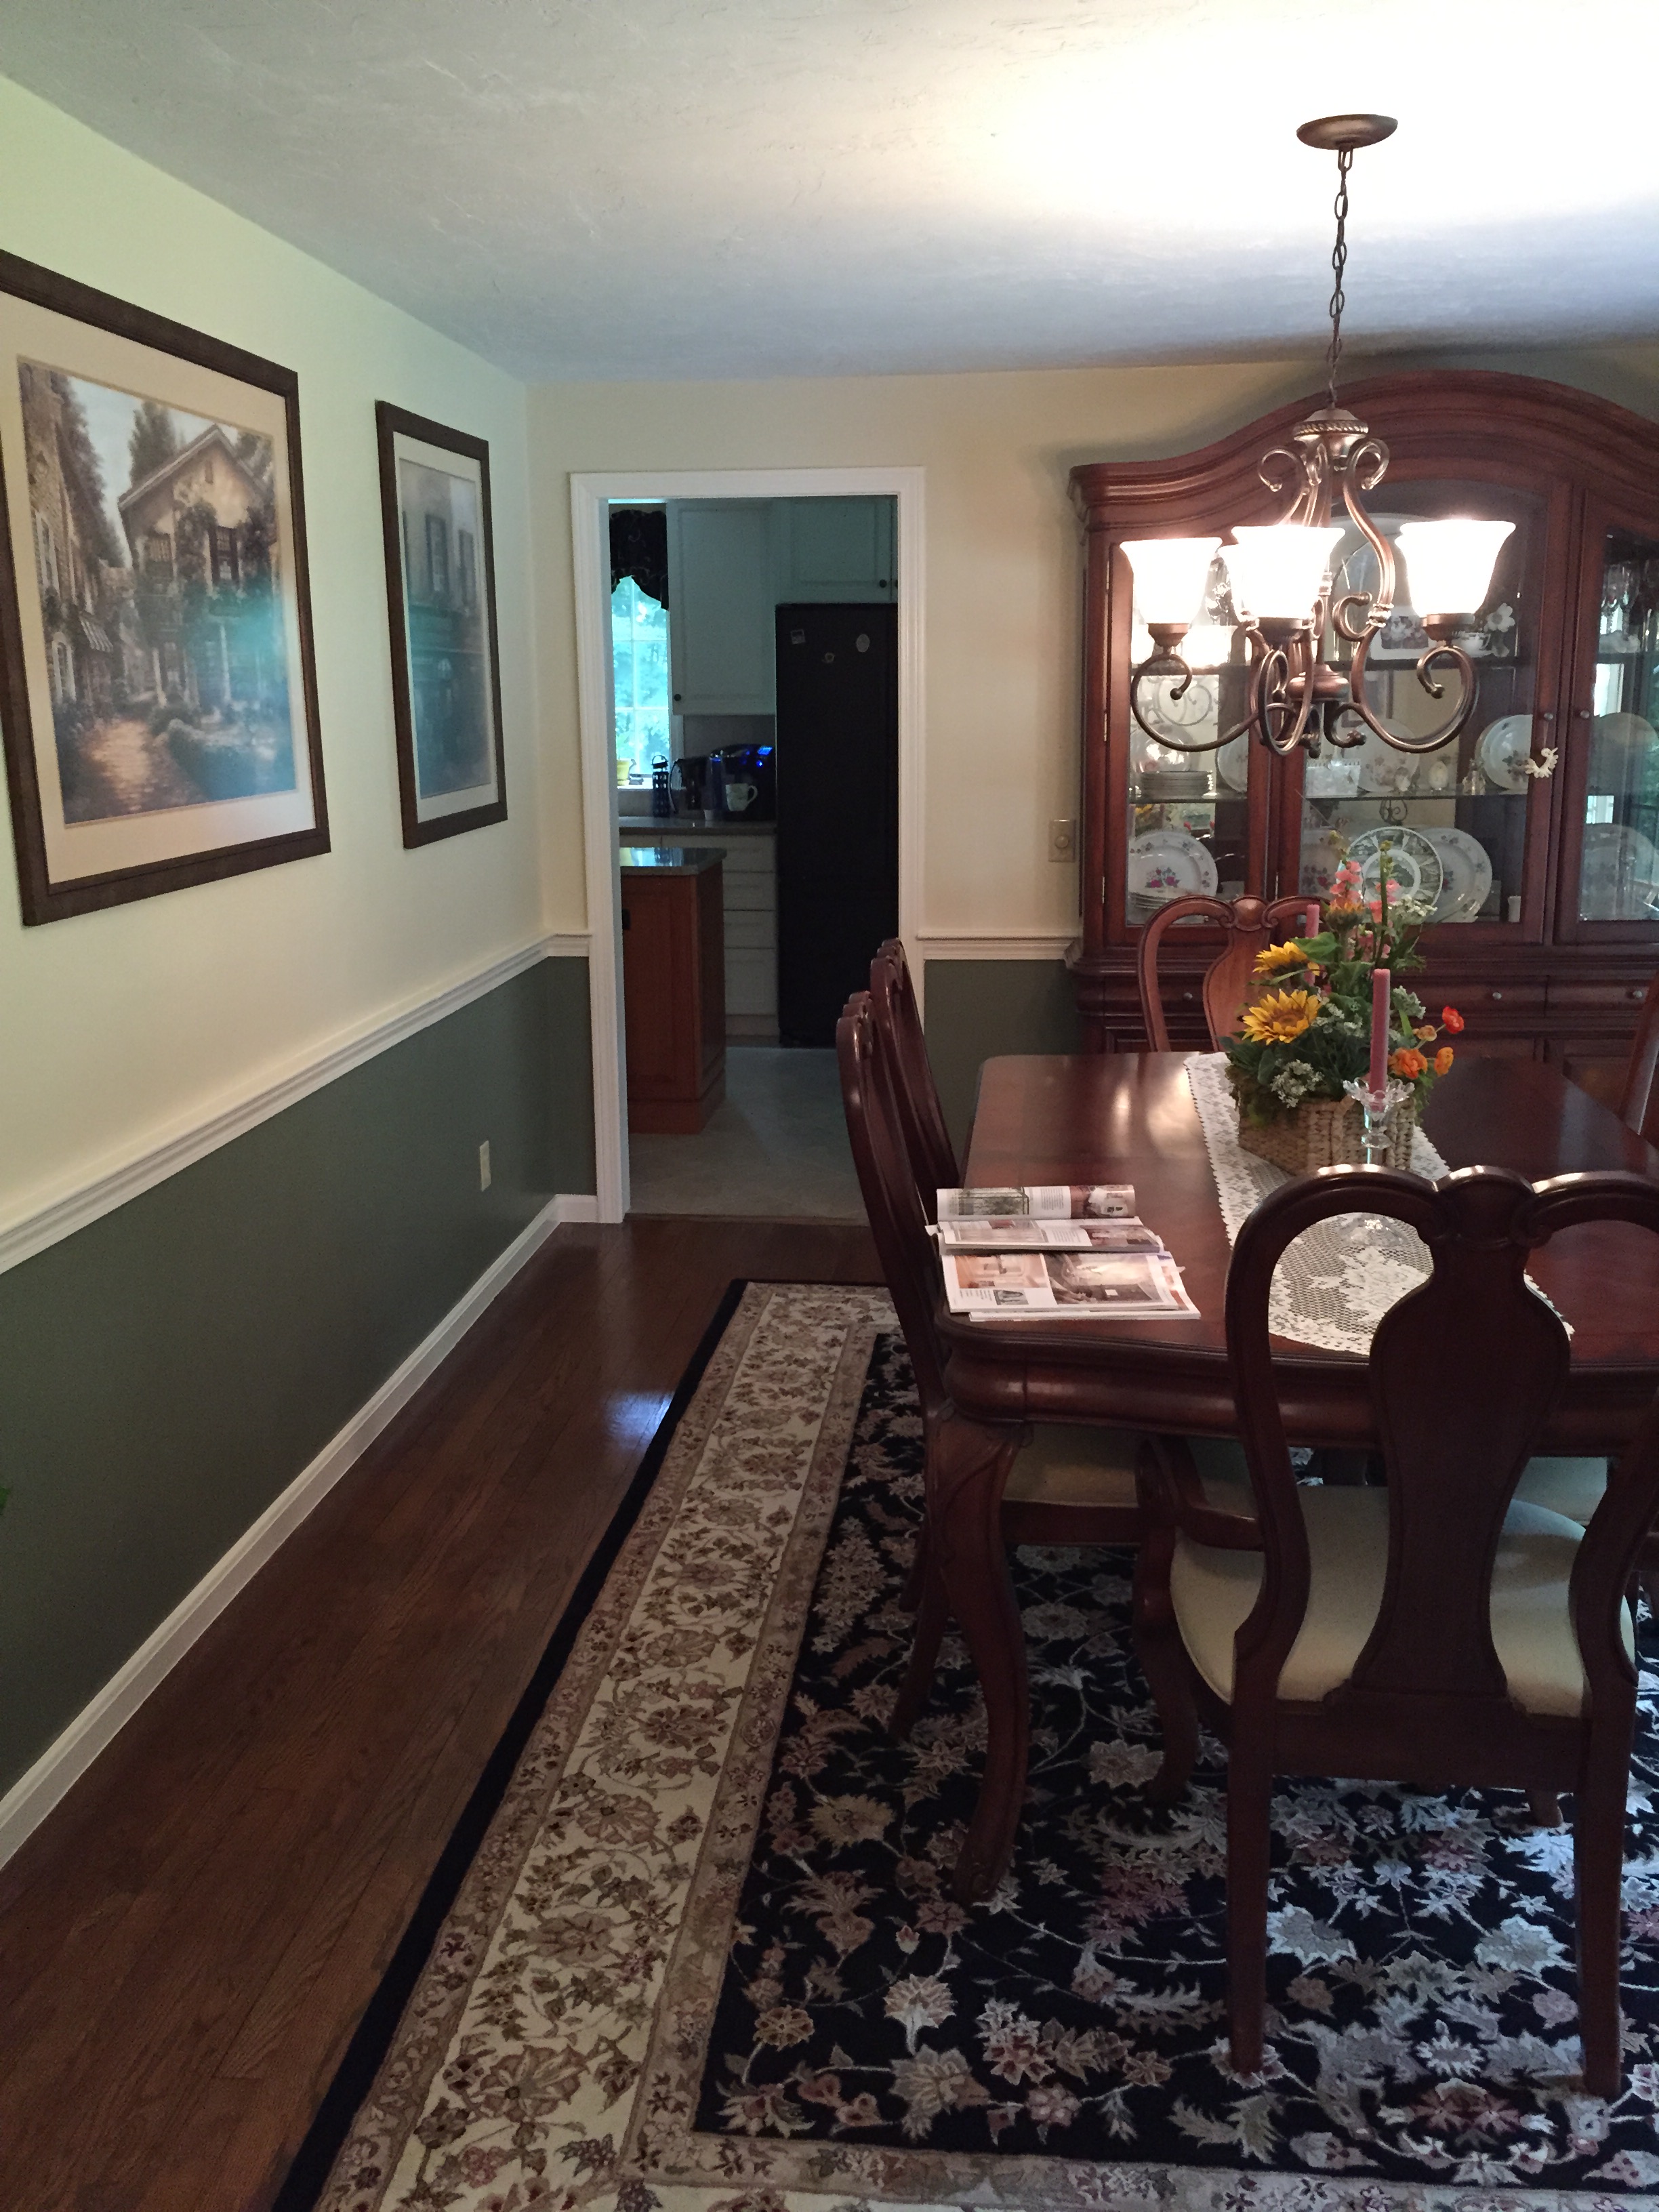 Before & After: Project Foxhollow Reveal | Kelly Rogers Interiors | Interiors for Families